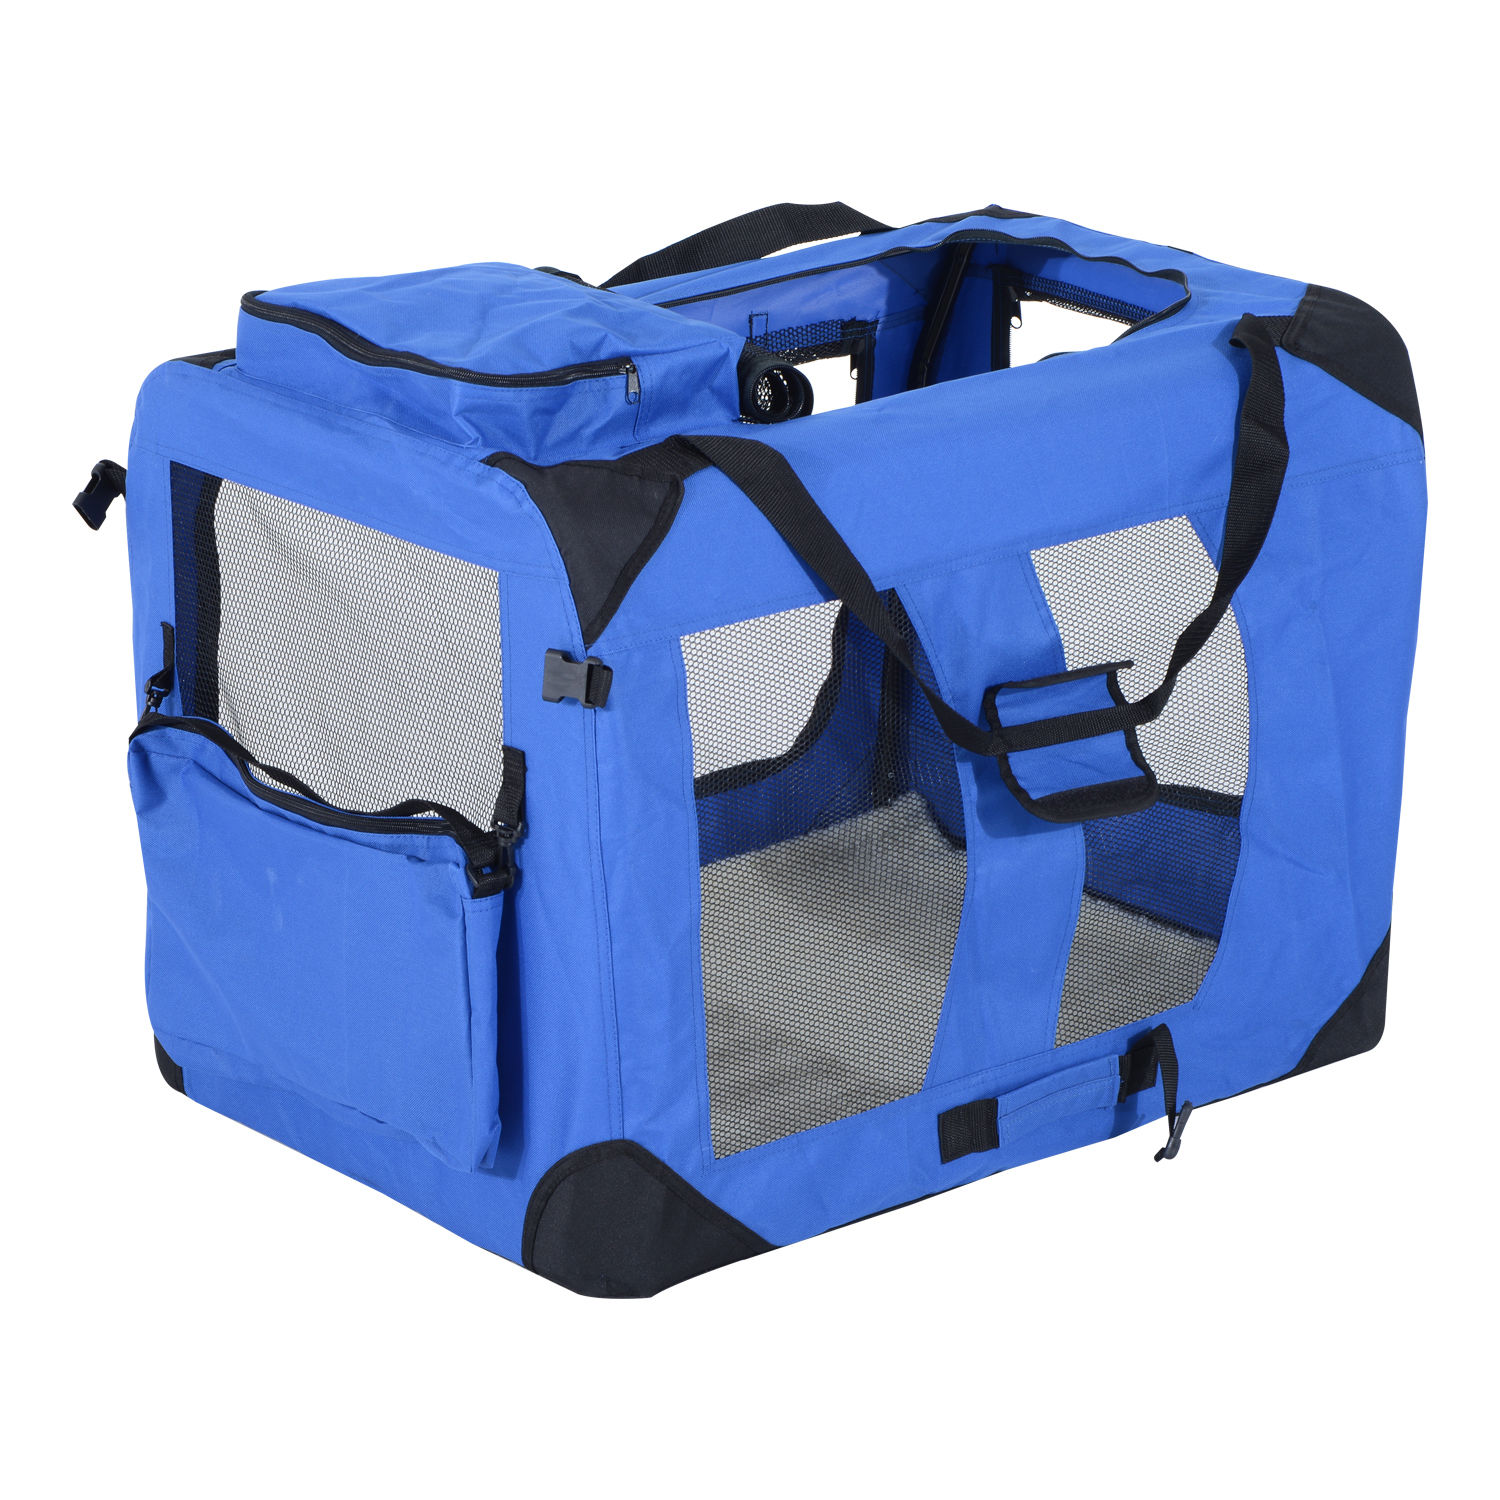 https://wholesaleeventtents.com/wp-content/uploads/2016/09/32-Inch-Soft-Sided-Folding-Crate-Pet-Carrier-Blue-2.jpg